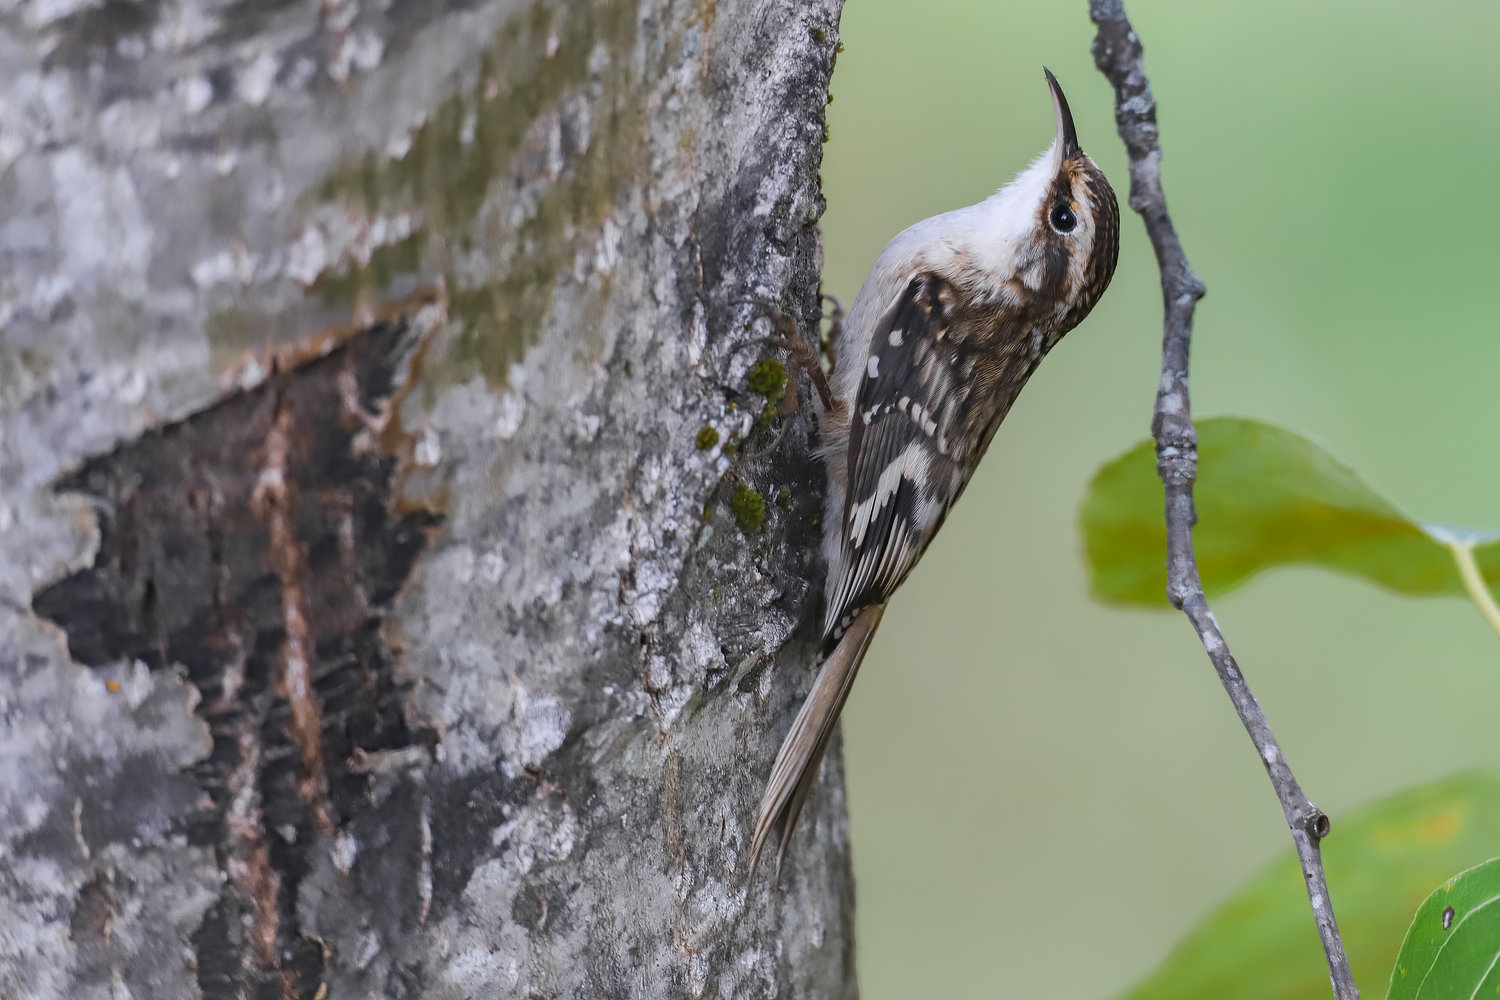 This is the Brown Creeper. No, the photo is not turned sideways; the bird is clinging to the tree.